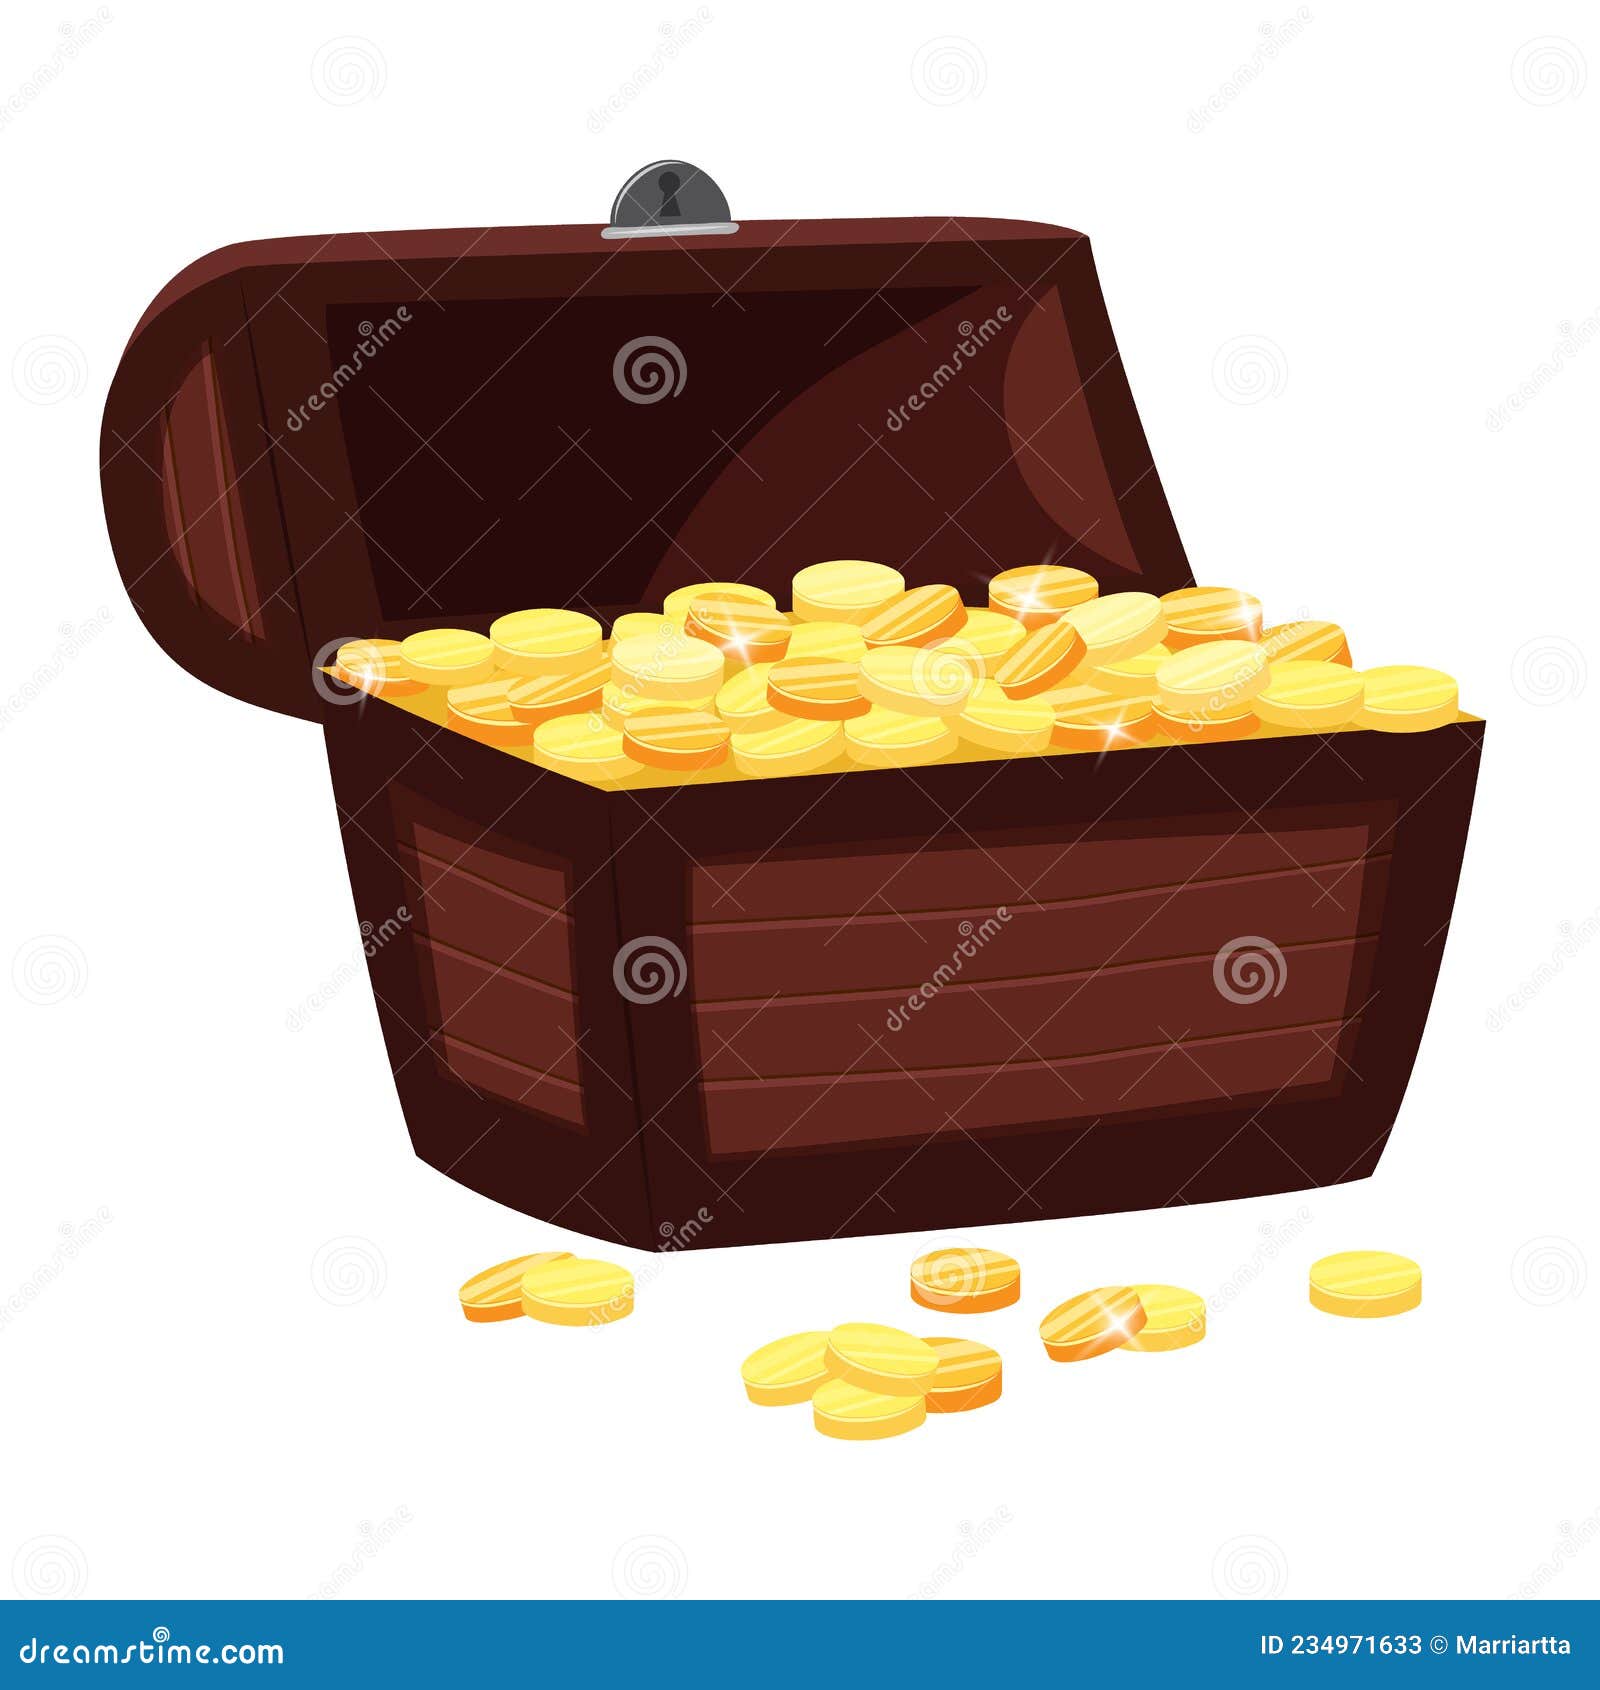 https://thumbs.dreamstime.com/z/treasure-chest-gold-coins-wooden-open-box-full-treasures-cartoon-style-isolated-white-element-adventuring-carnival-234971633.jpg